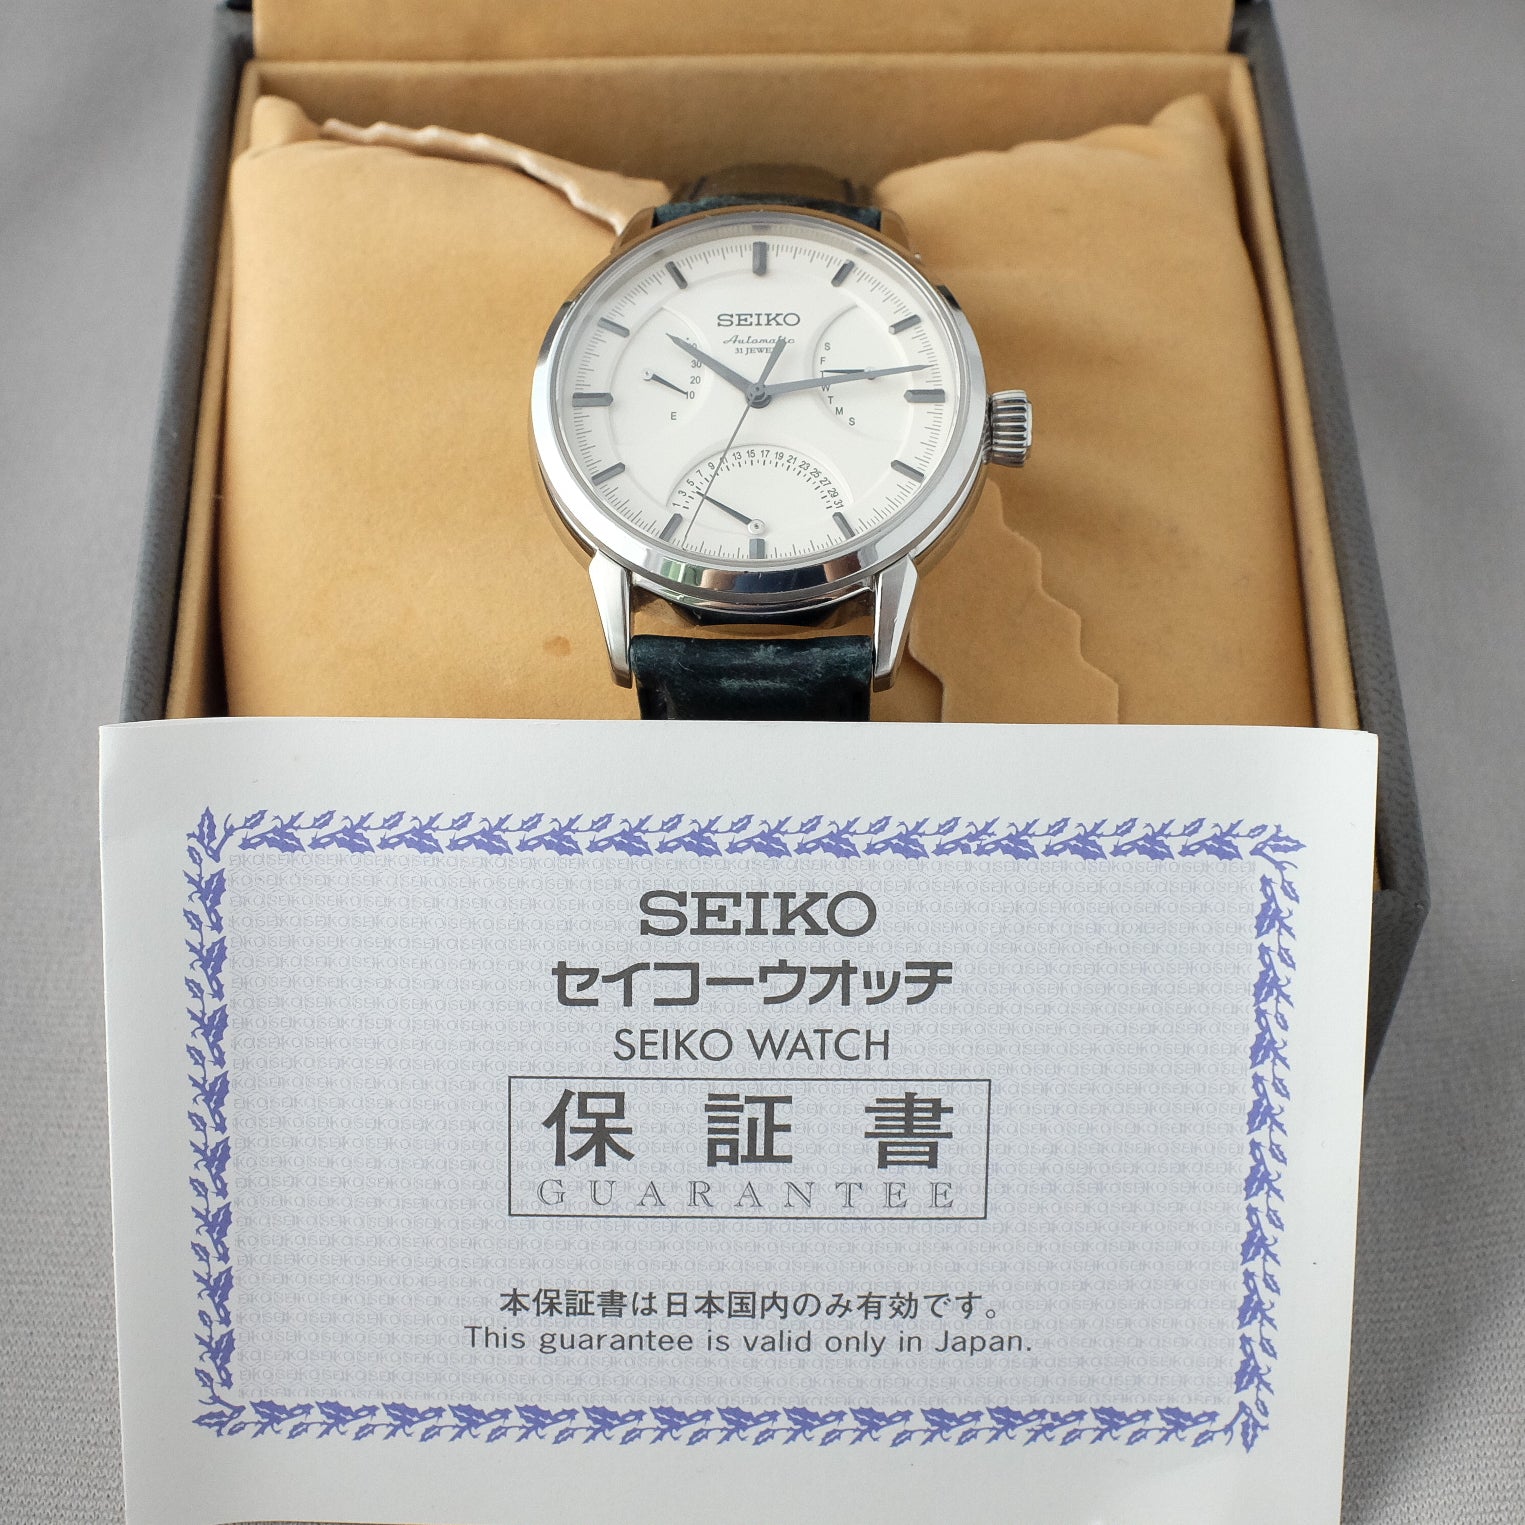 Seiko SARD009 from 2010 (Box and Paper)